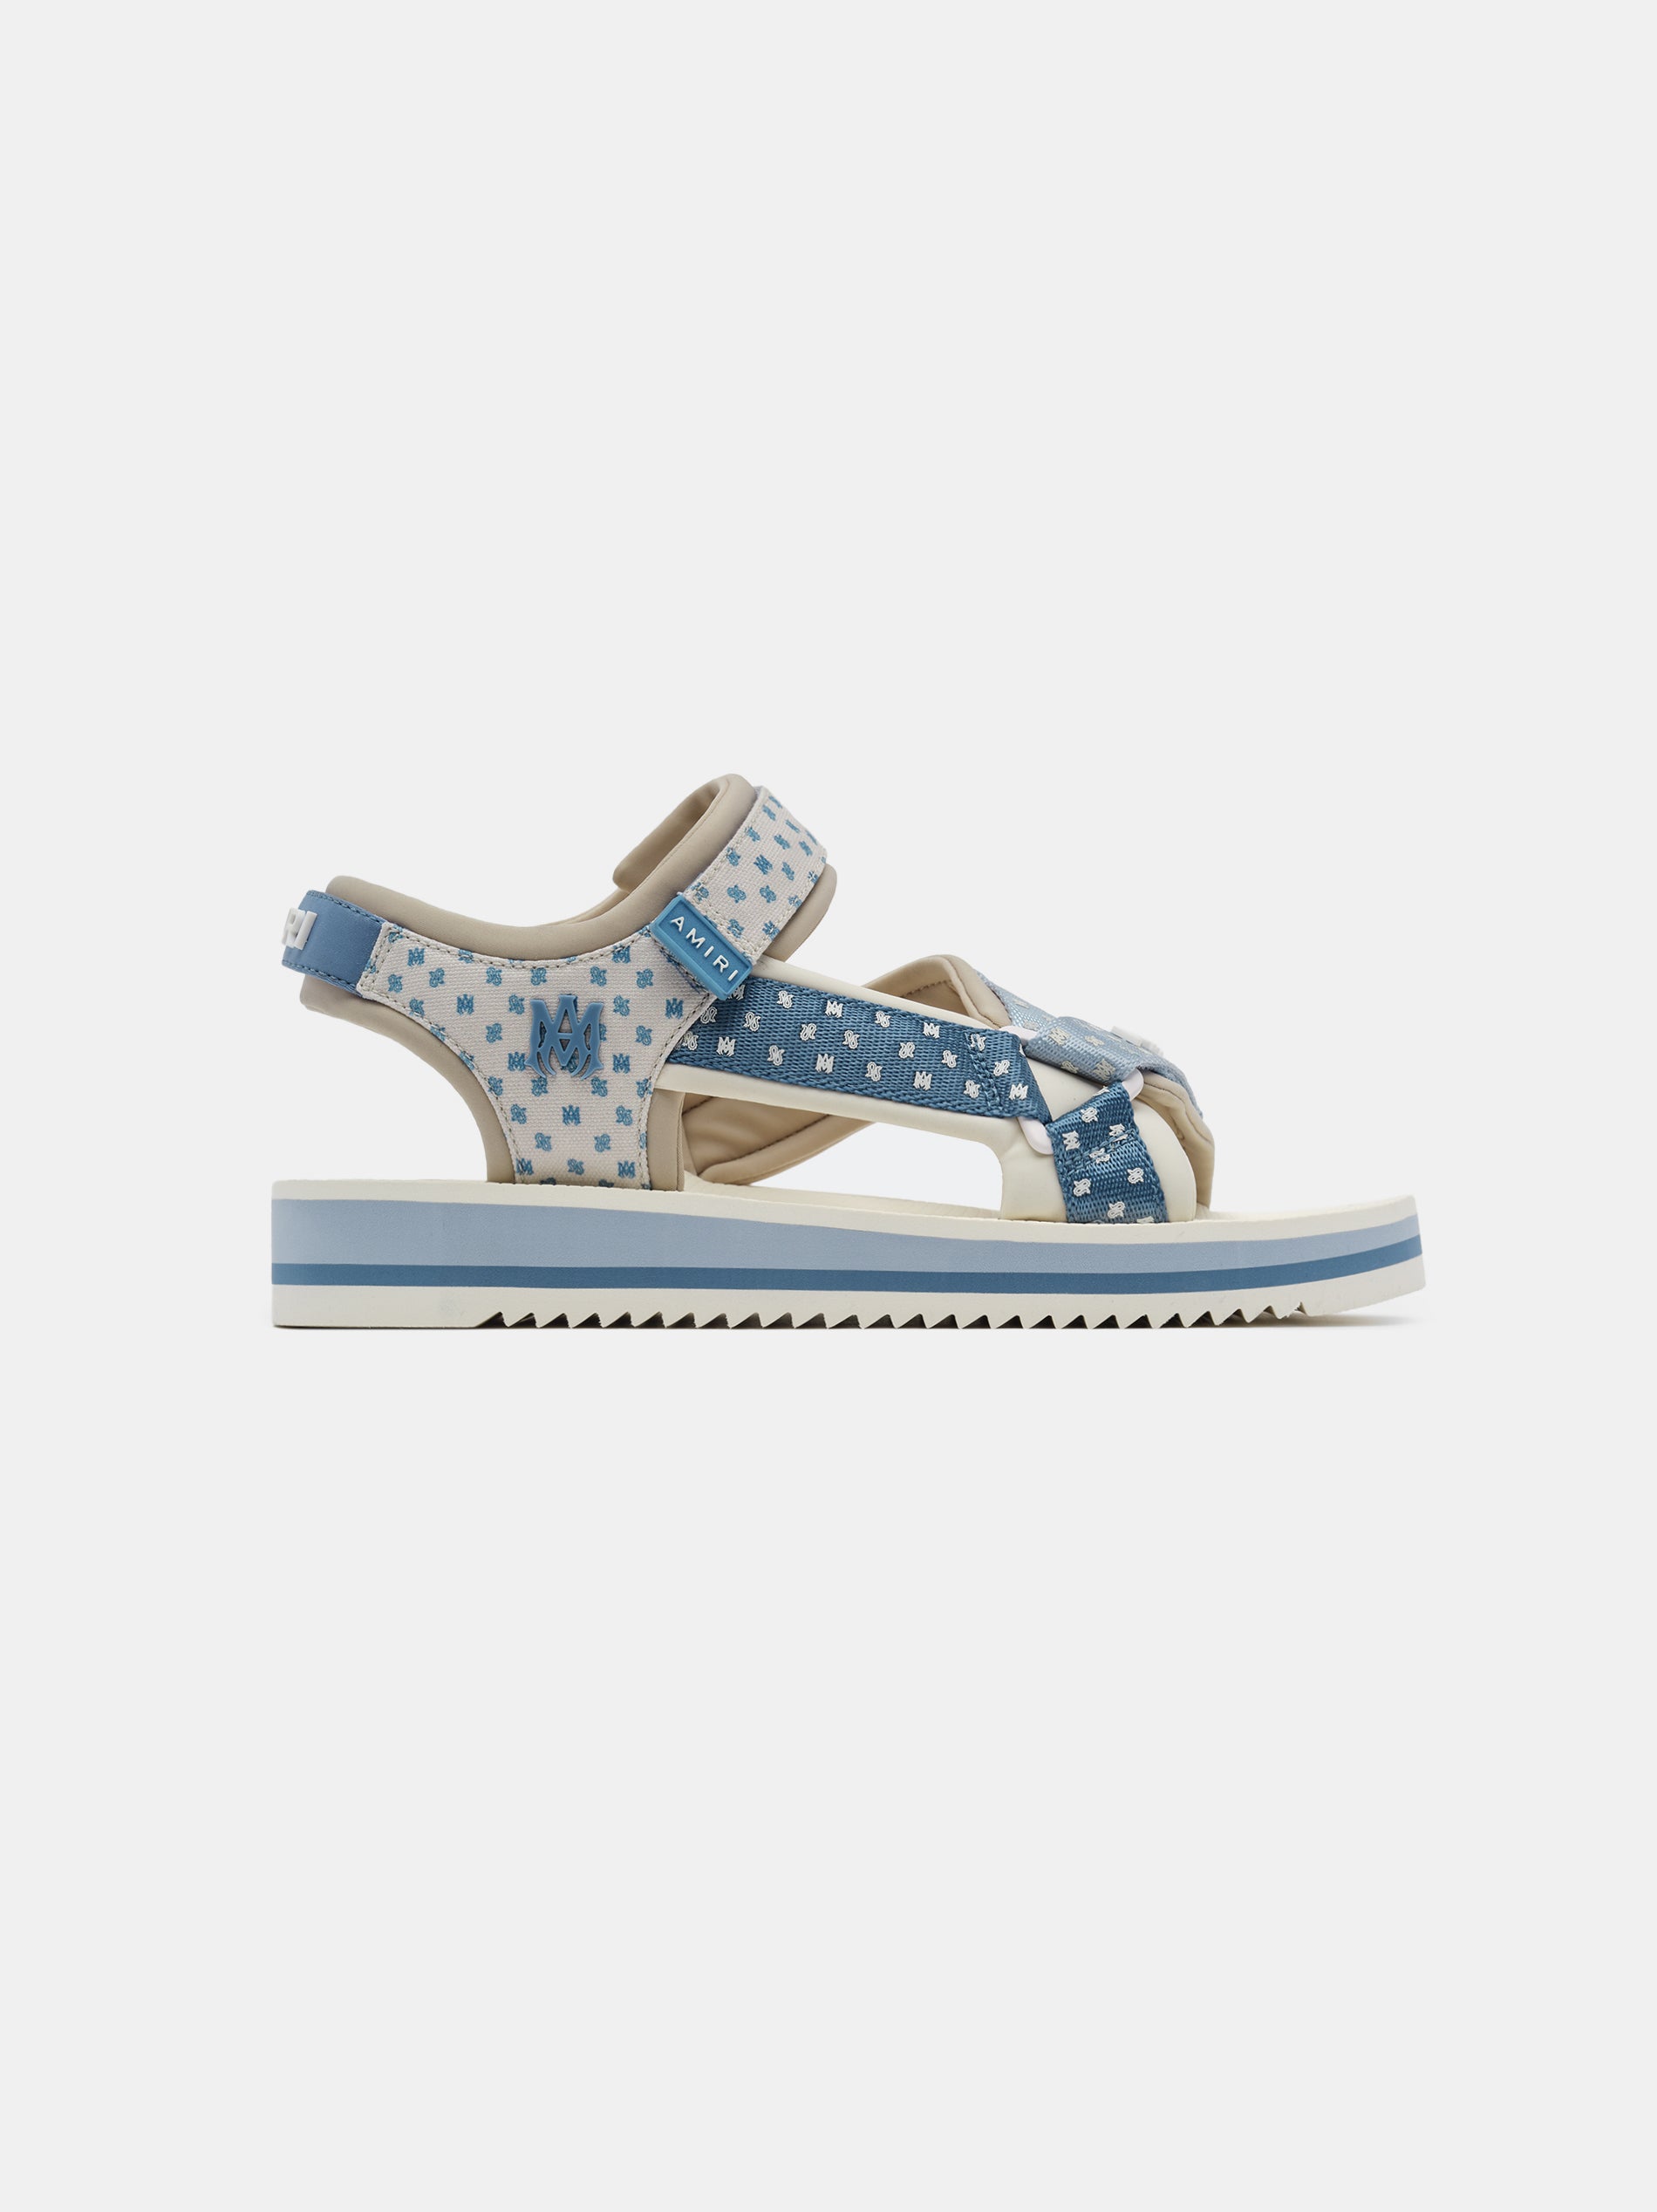 Product MA PAISLEY SANDAL - Blue Birch featured image